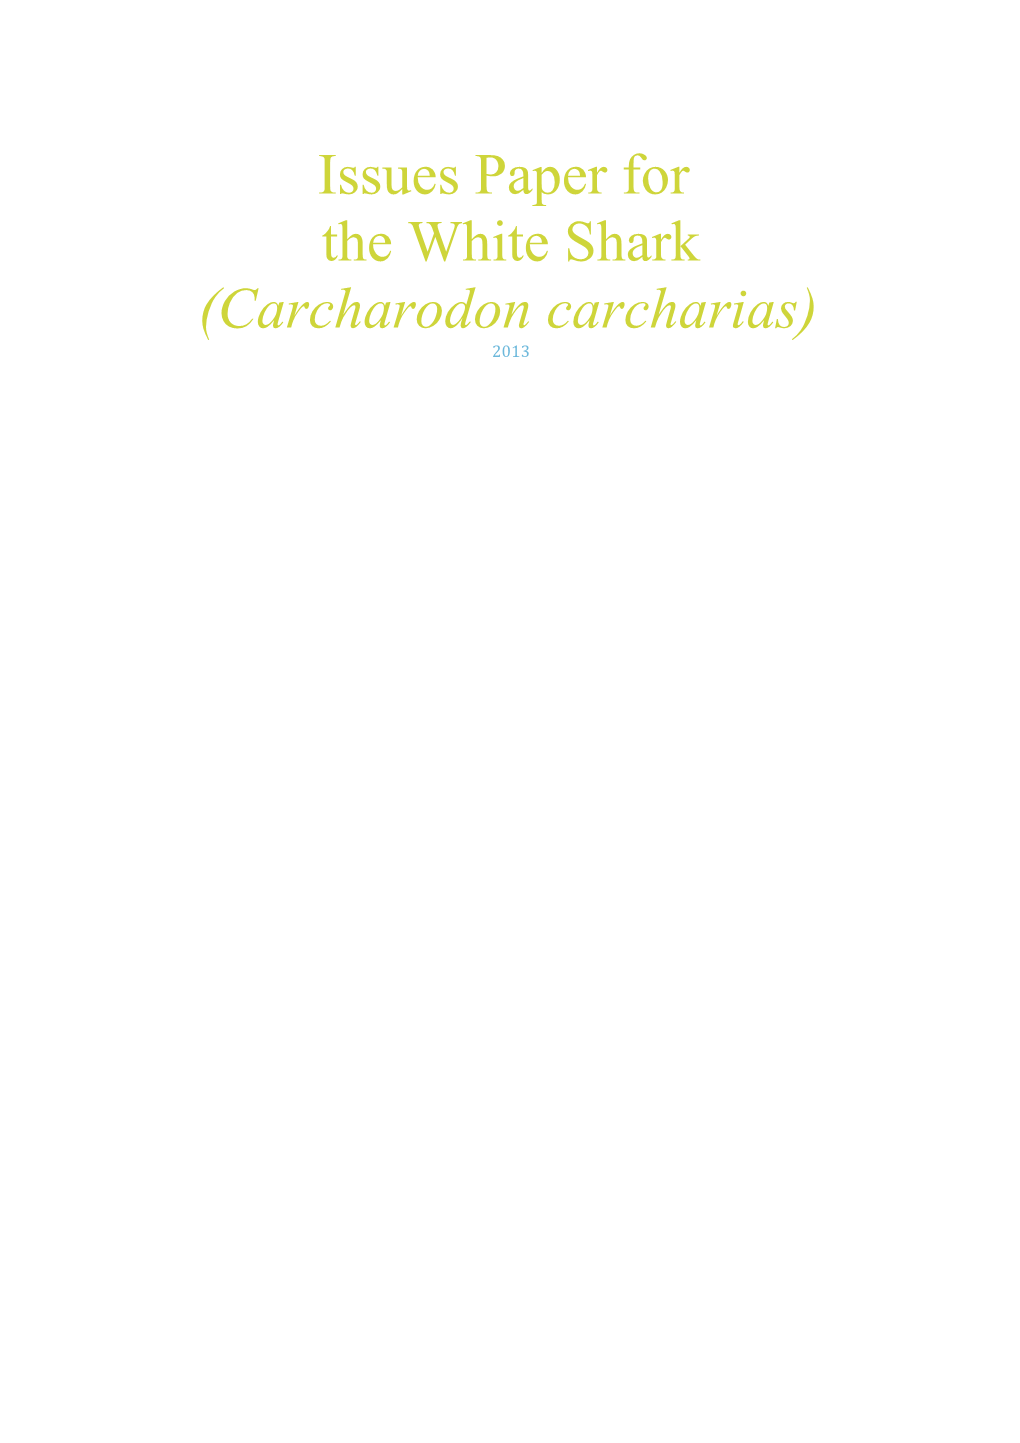 Issues Paper for the White Shark (Carcharodon Carcharias)